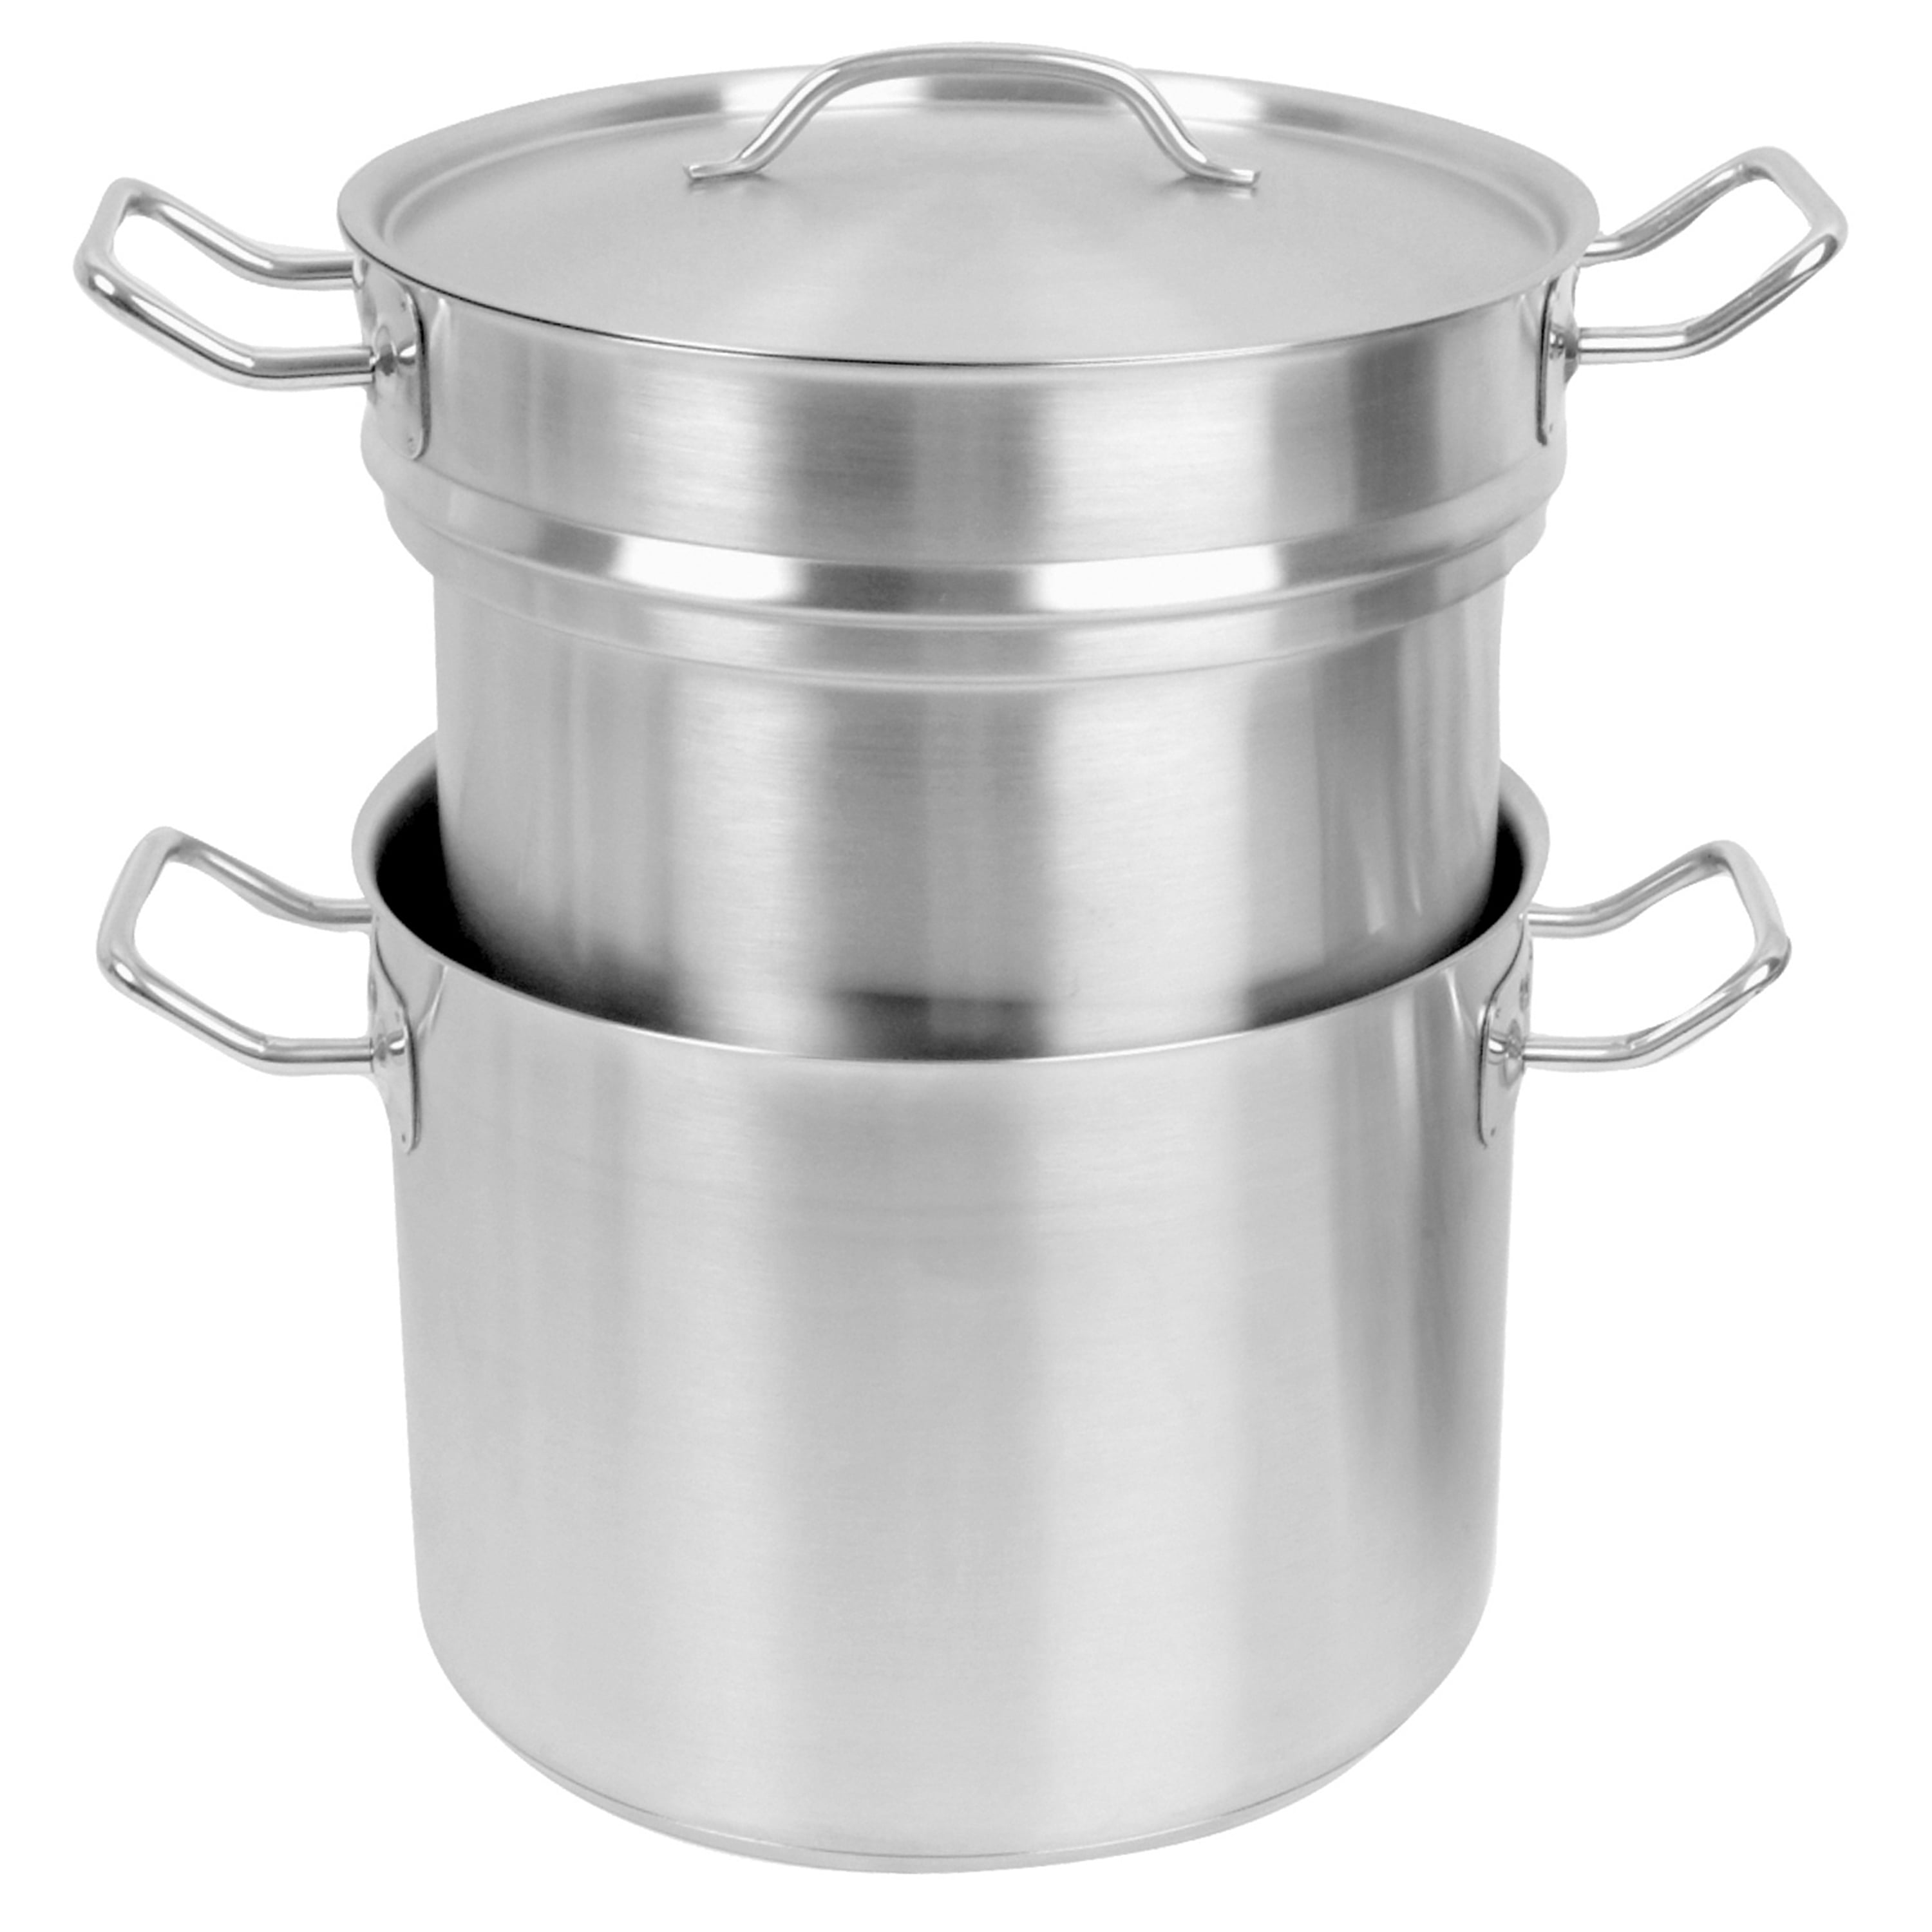 Frieling 1.6 Quarts Stainless Steel Double Boiler & Reviews